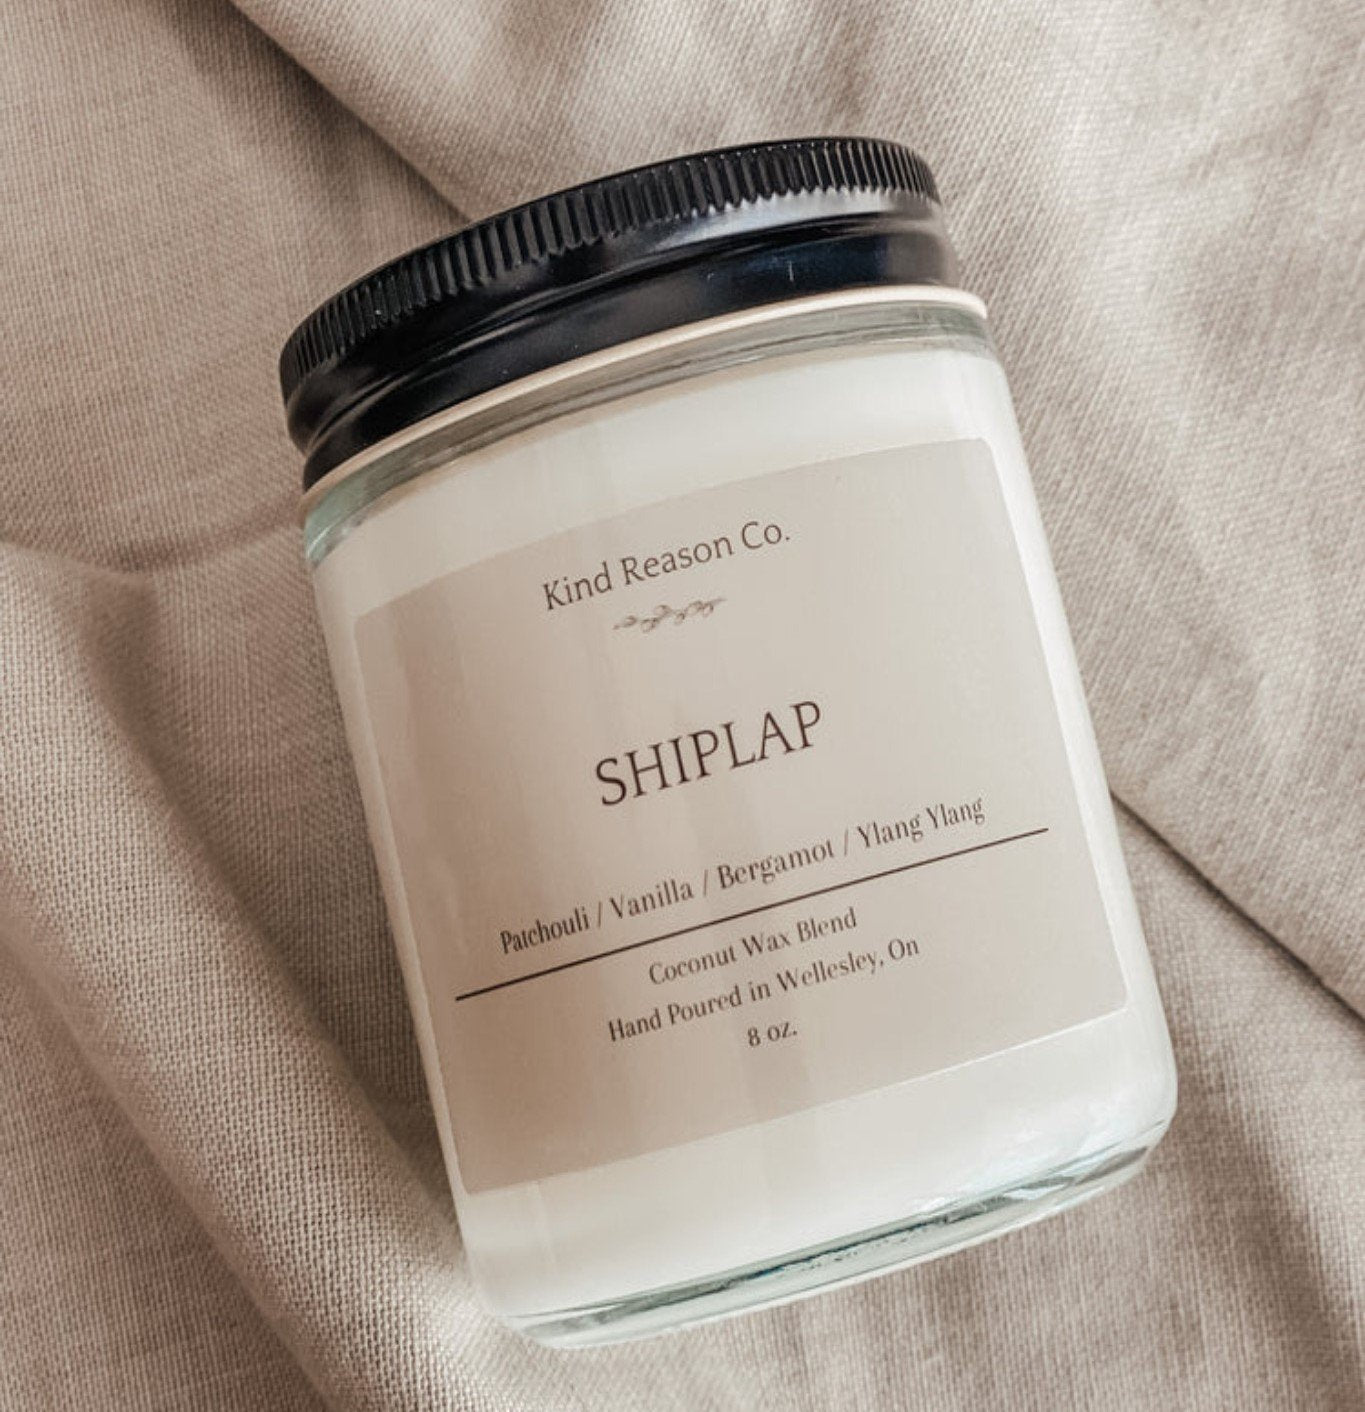 Farmhouse Shiplap Candle: 8oz and 16oz options. Made with Toxin-Free ingredients